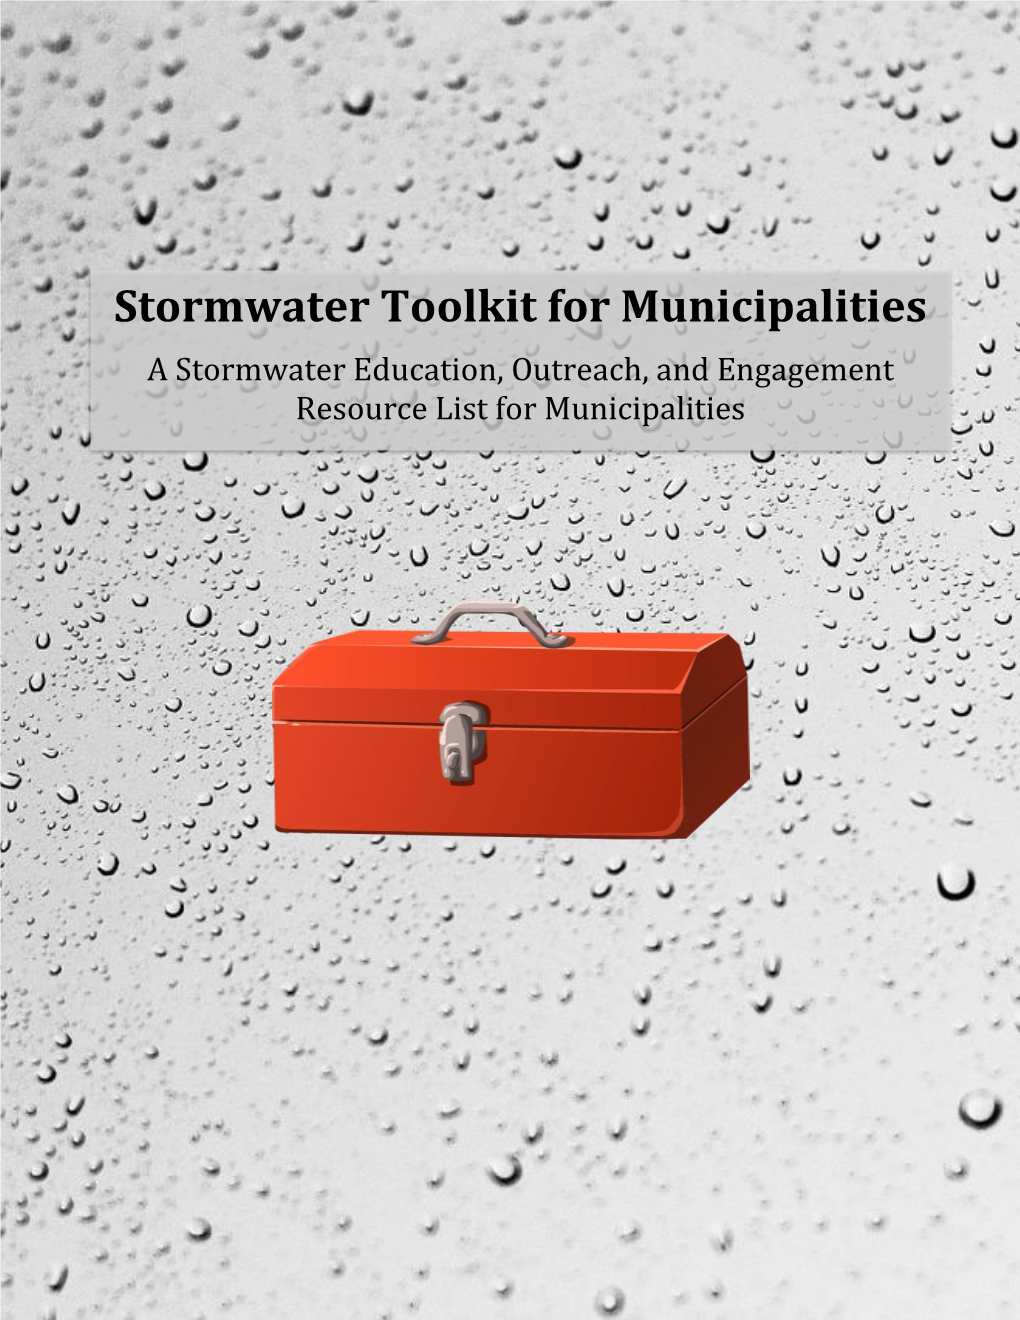 Stormwater Toolkit for Municipalities a Stormwater Education, Outreach, and Engagement Resource List for Municipalities